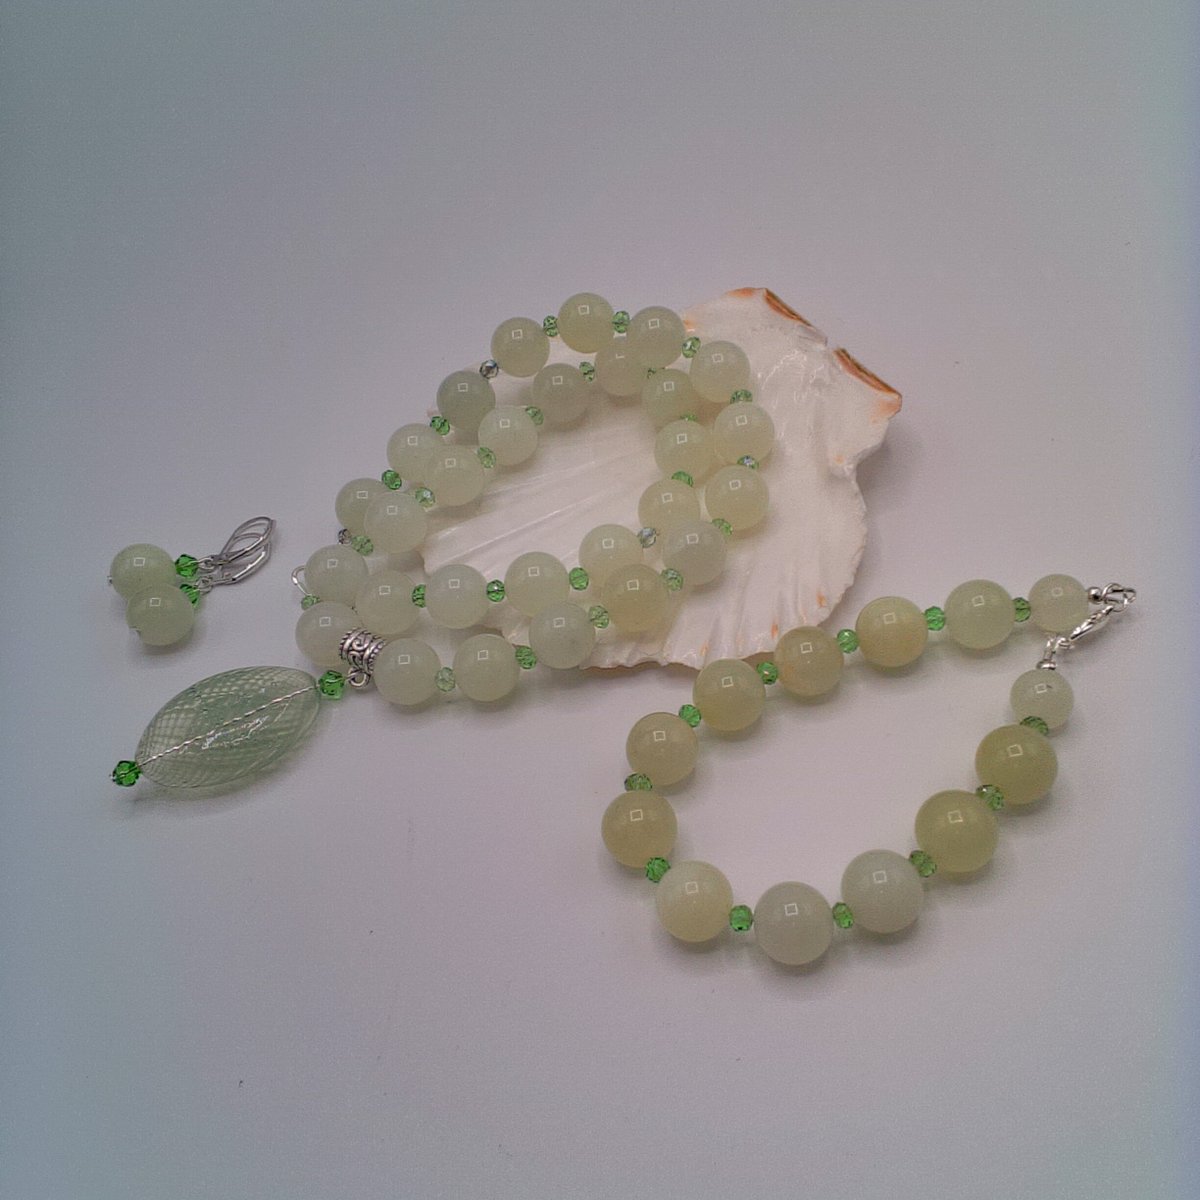 This Olive Jade & Crystal Necklace with Hollow Glass Pendant, Bracelet & Earrings would look great with any outfit you wear for a special occasion. £35 + P&P. folksy.com/items/8319672-… #newonfolksy #folksy365 #folksyshop #oswestryjewels #jadejewellery #giftforher #birthdaygift